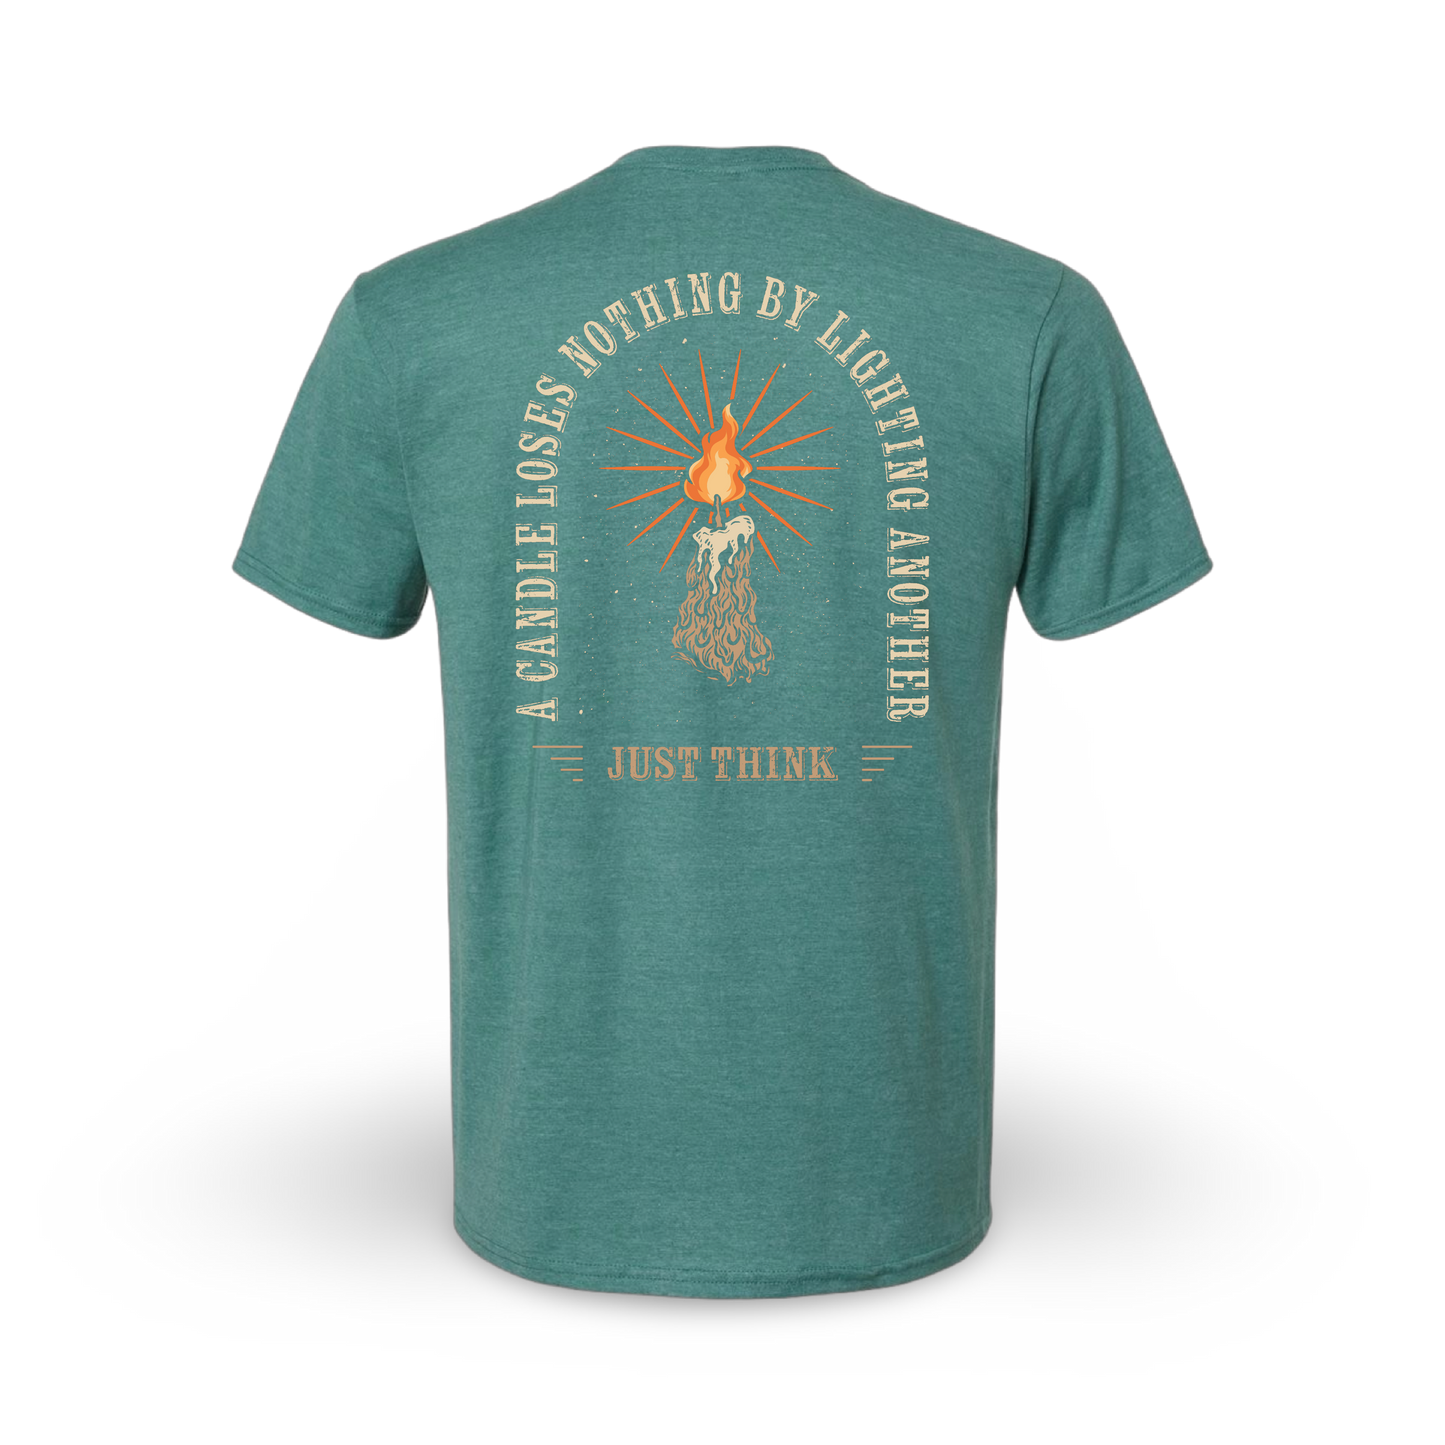 A Light Is All It Takes (Unisex Tee Standard)